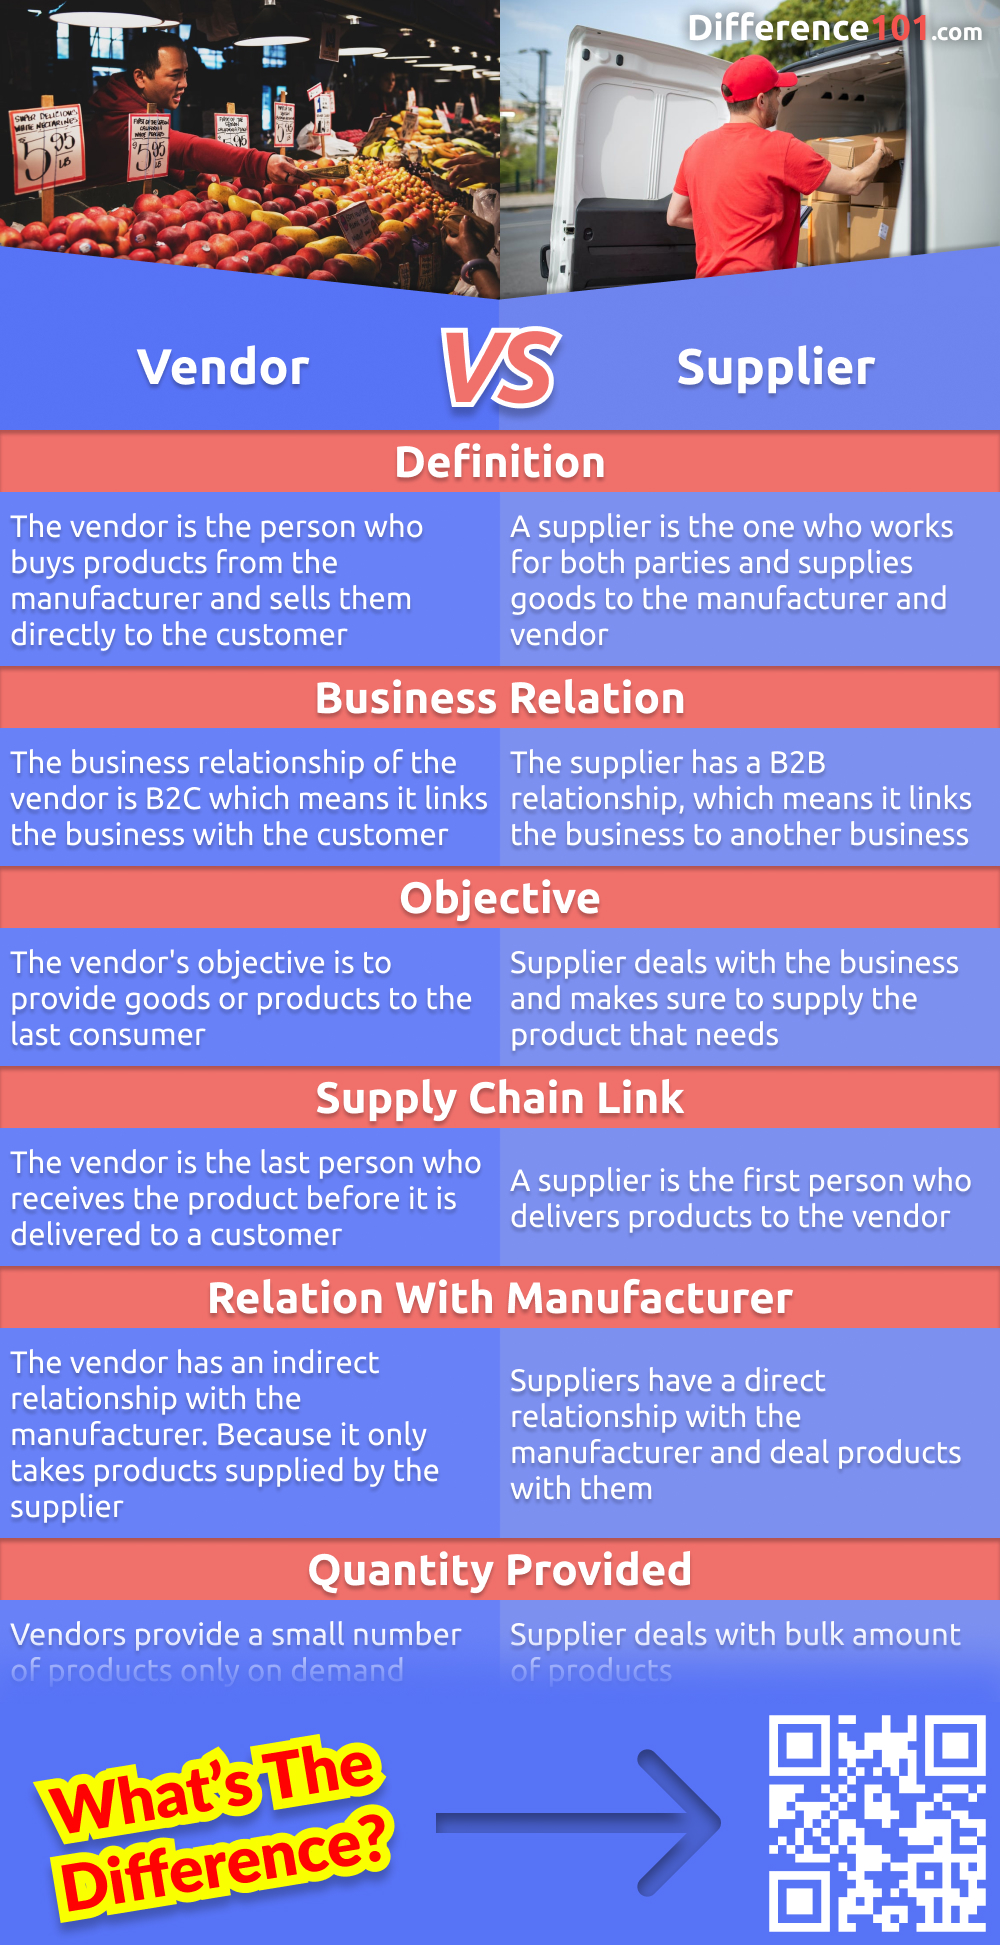 Do you know the difference between a vendor and a supplier? Learn the differences between these two business terms and when to use each term. Read more here.